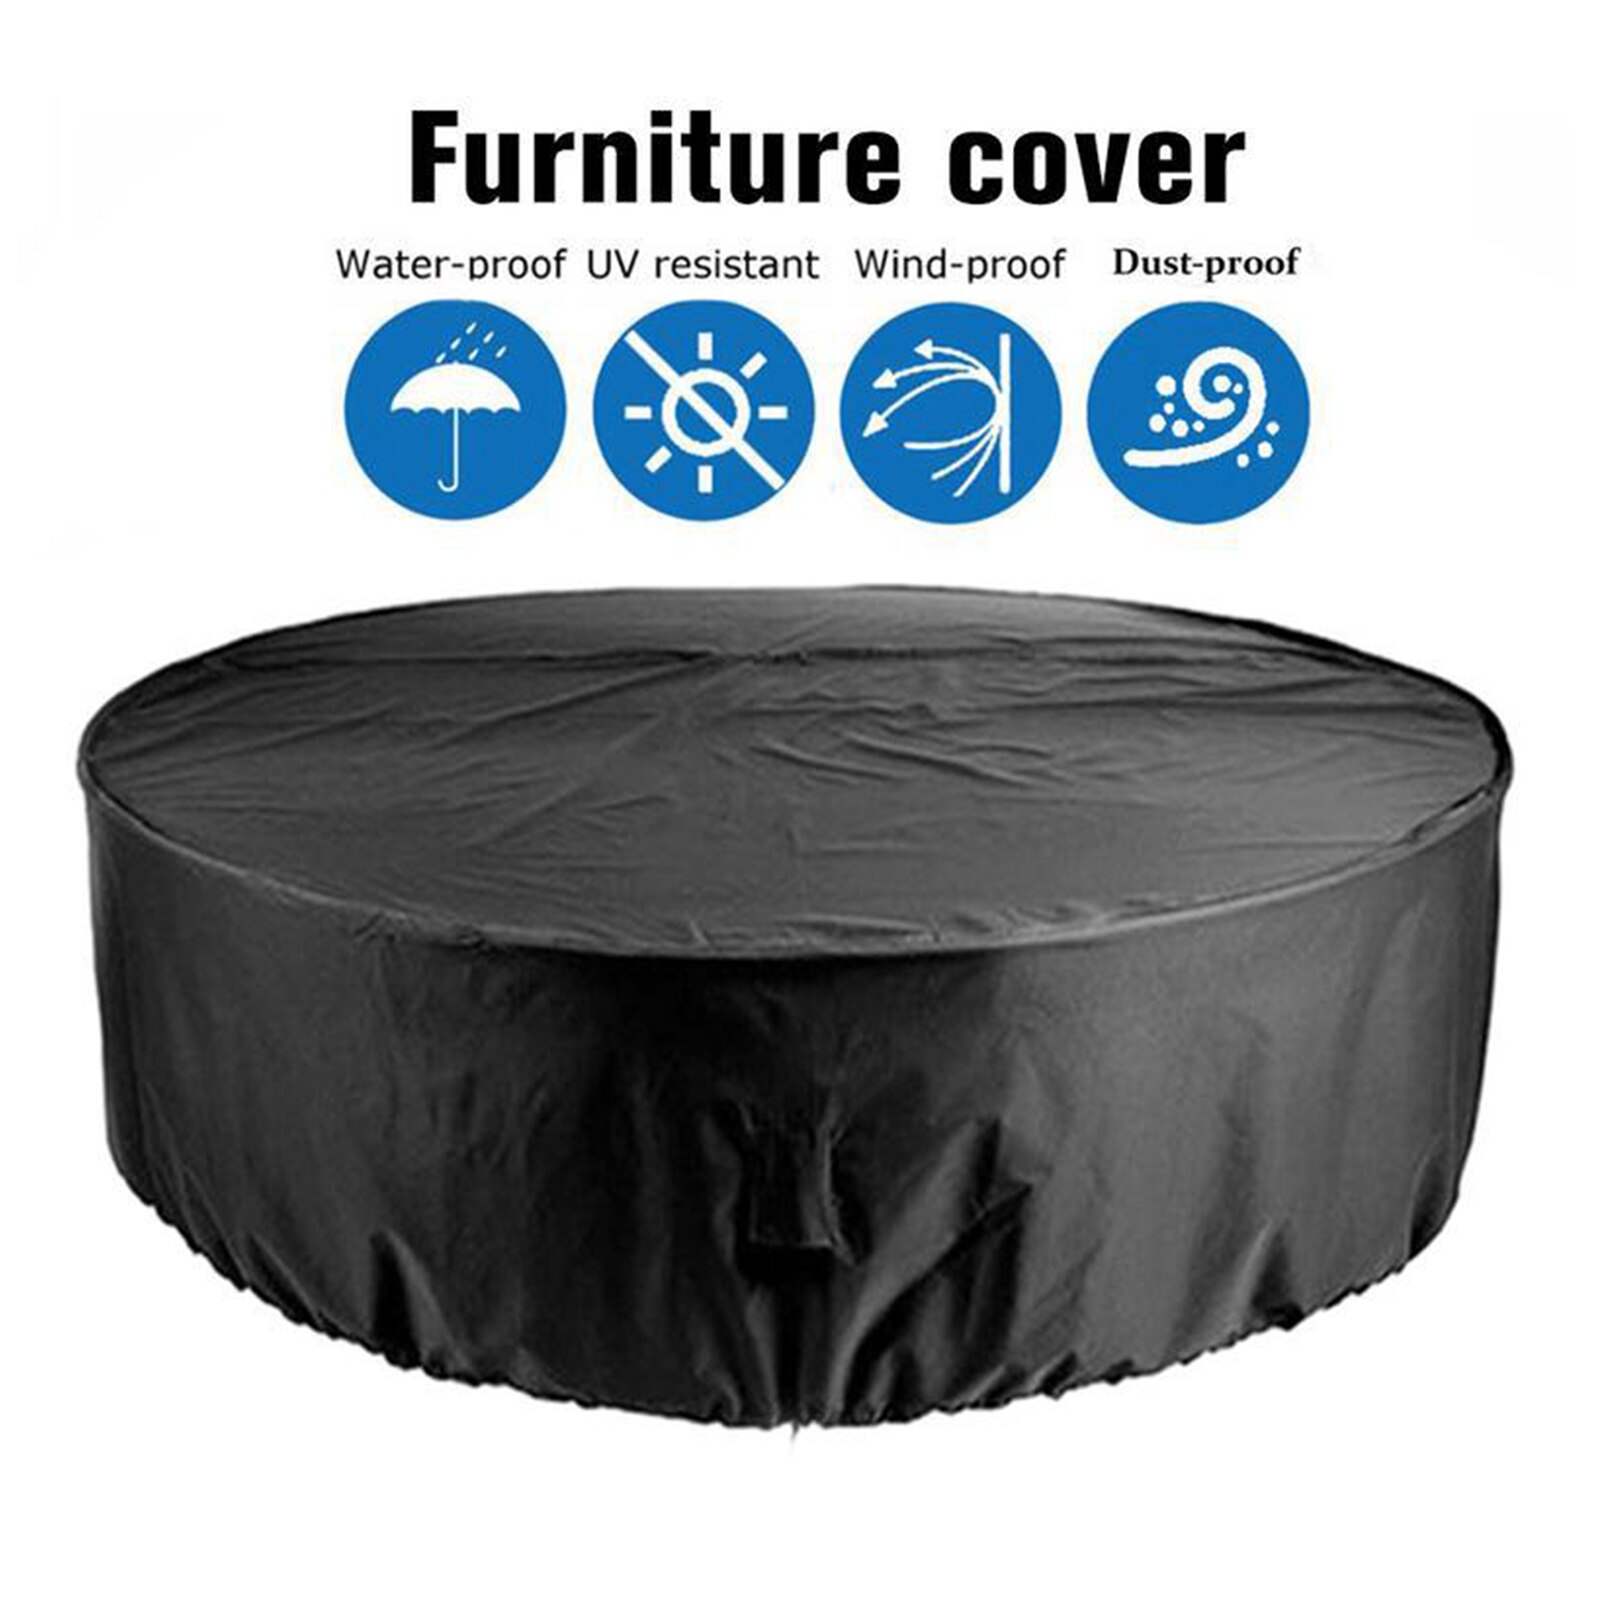 Outdoor Patio Furniture Covers Waterproof Table Chair Set Protect Covers Windproof Tear-Resistant UV Garden Furniture Cover